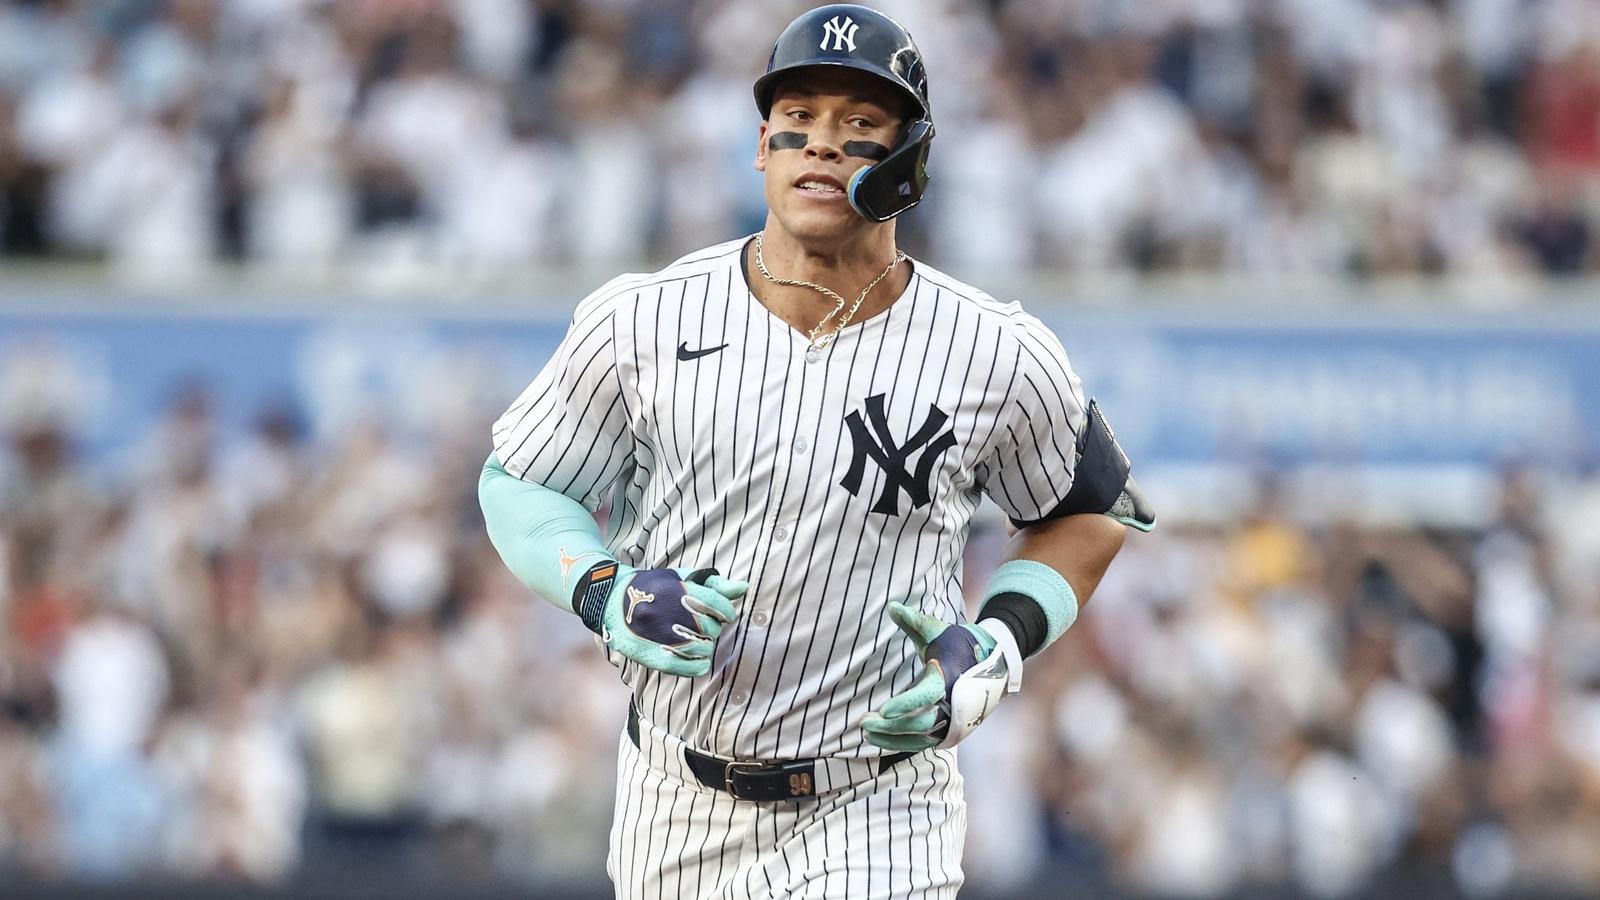 Yankees' Aaron Judge named AL Player of the Month for June